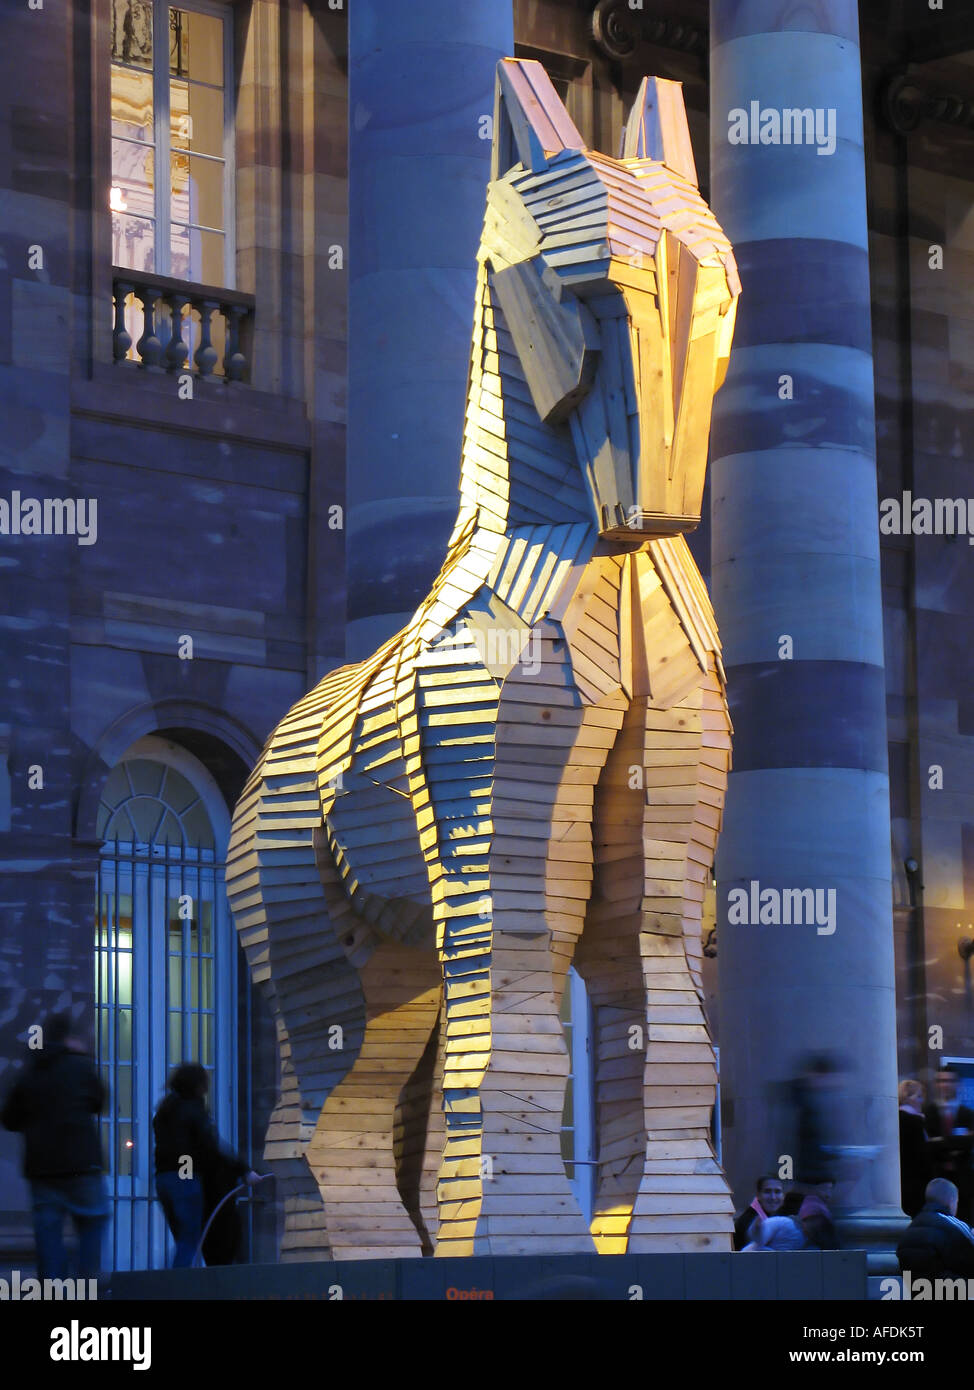 Wooden Trojan horse by Philippe Miesch in front of Opera house at night, Strasbourg, Alsace, France, Europe Stock Photo